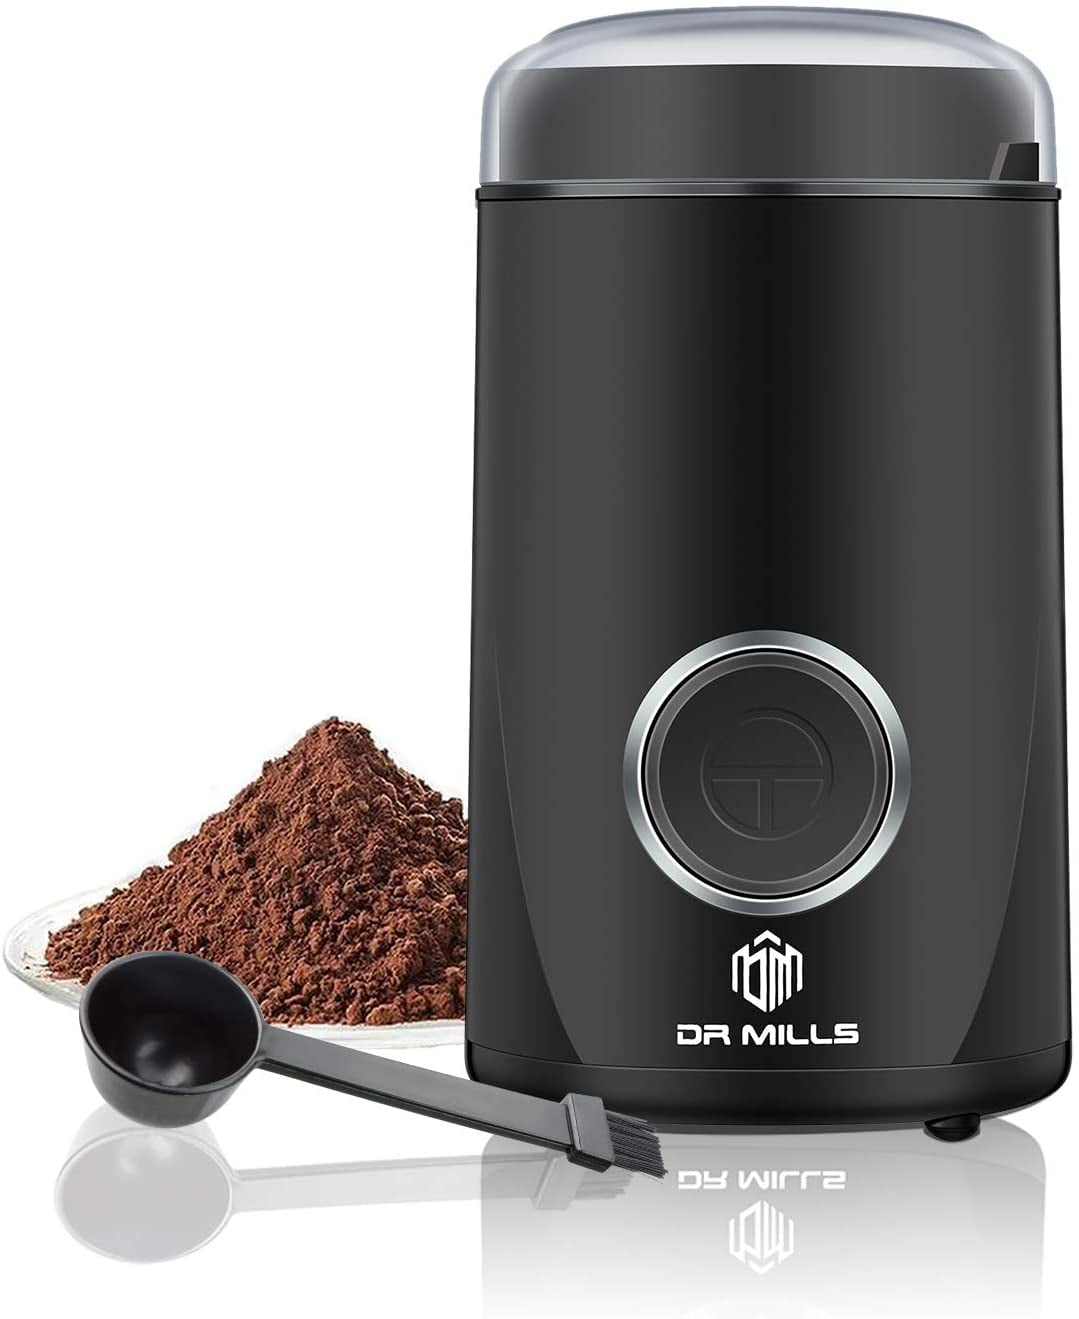 Dmofwhi Cordless Coffee Grinder Electric, USB Rechargeable Coffee Bean Grinder with 304 Stainless Steel Blade and Removable Bowl-Black